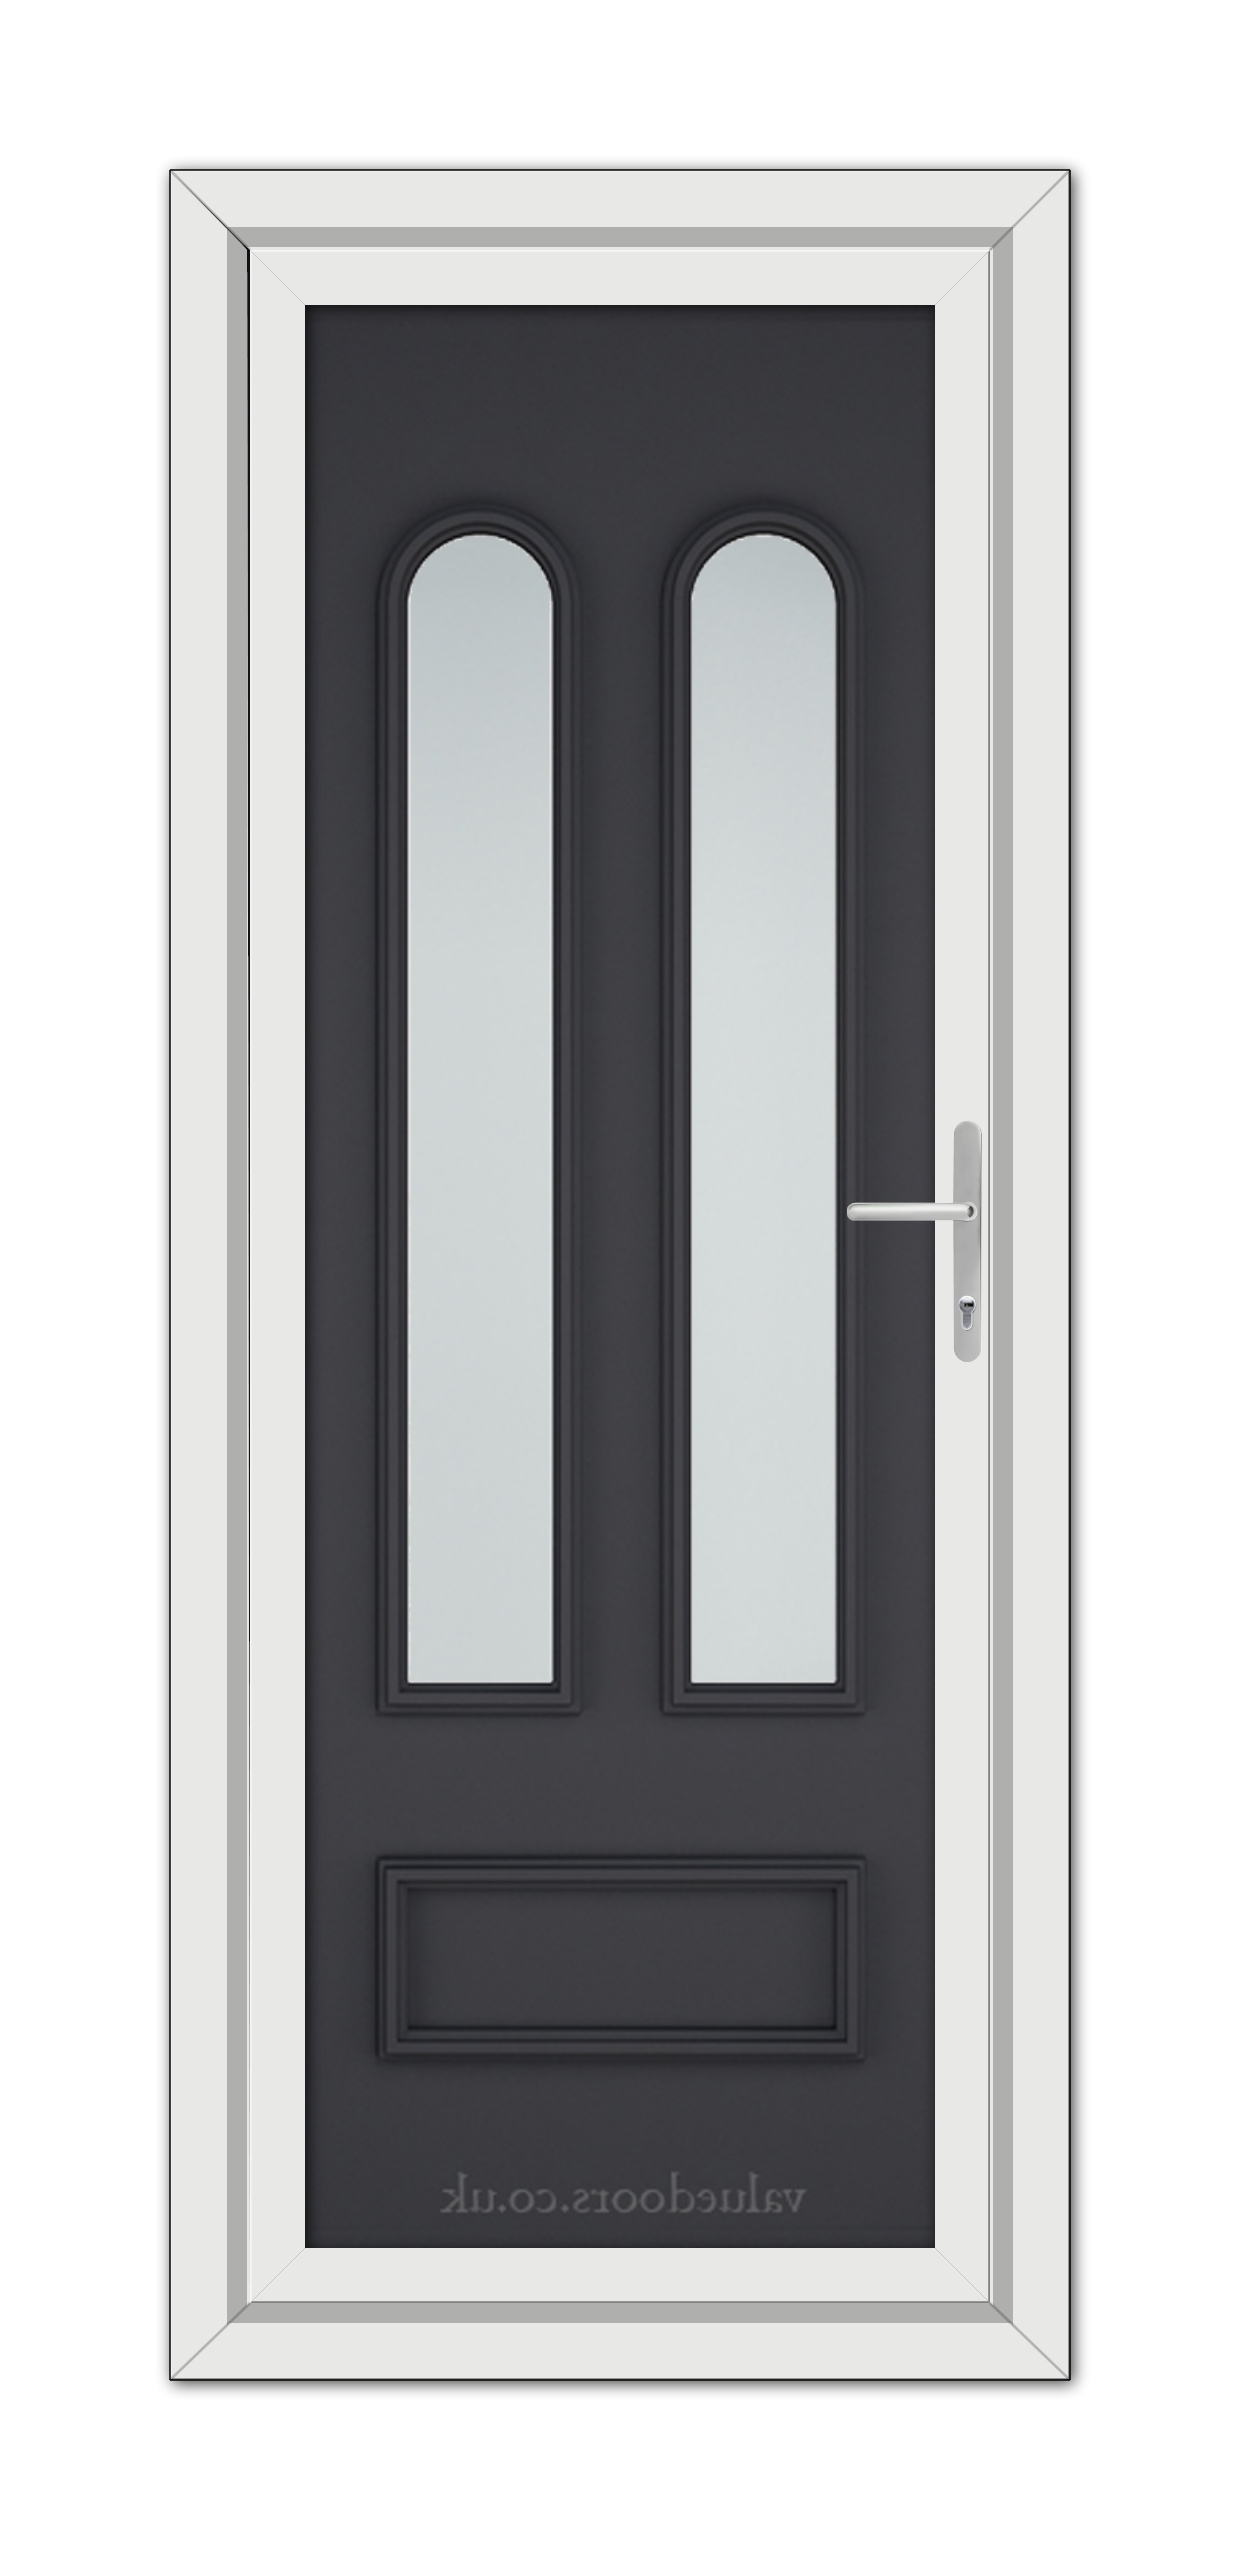 Modern Grey Madrid uPVC Door with long, vertical glass windows and a silver handle, set in a white frame.